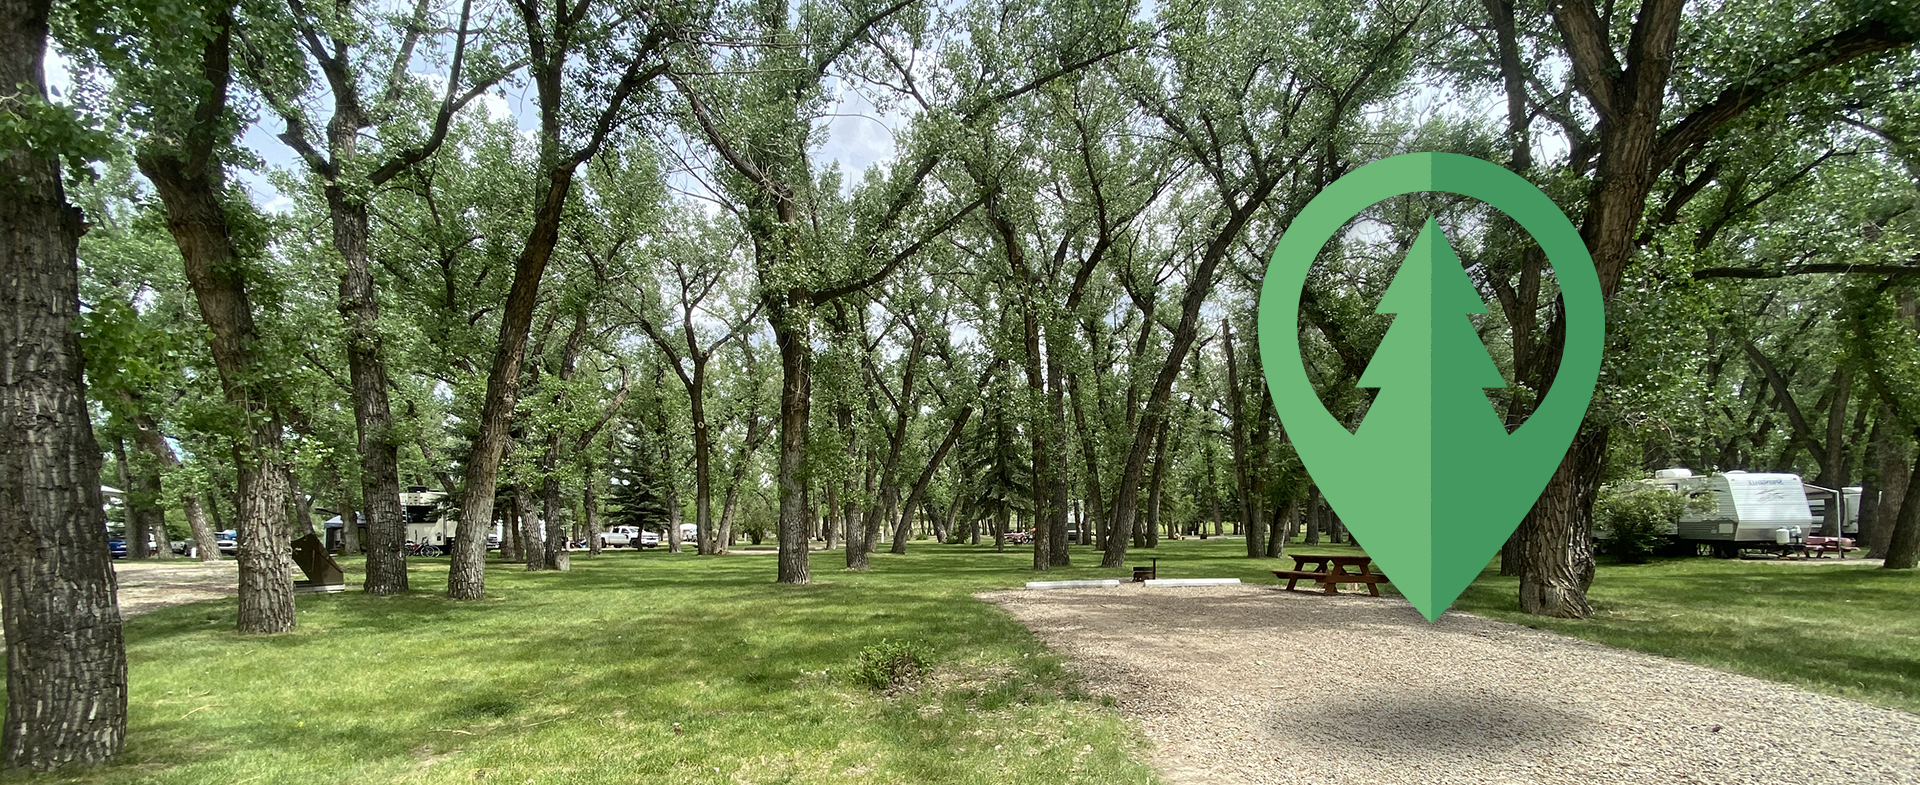 Book your favourite campsite! At the Taber Municipal Park